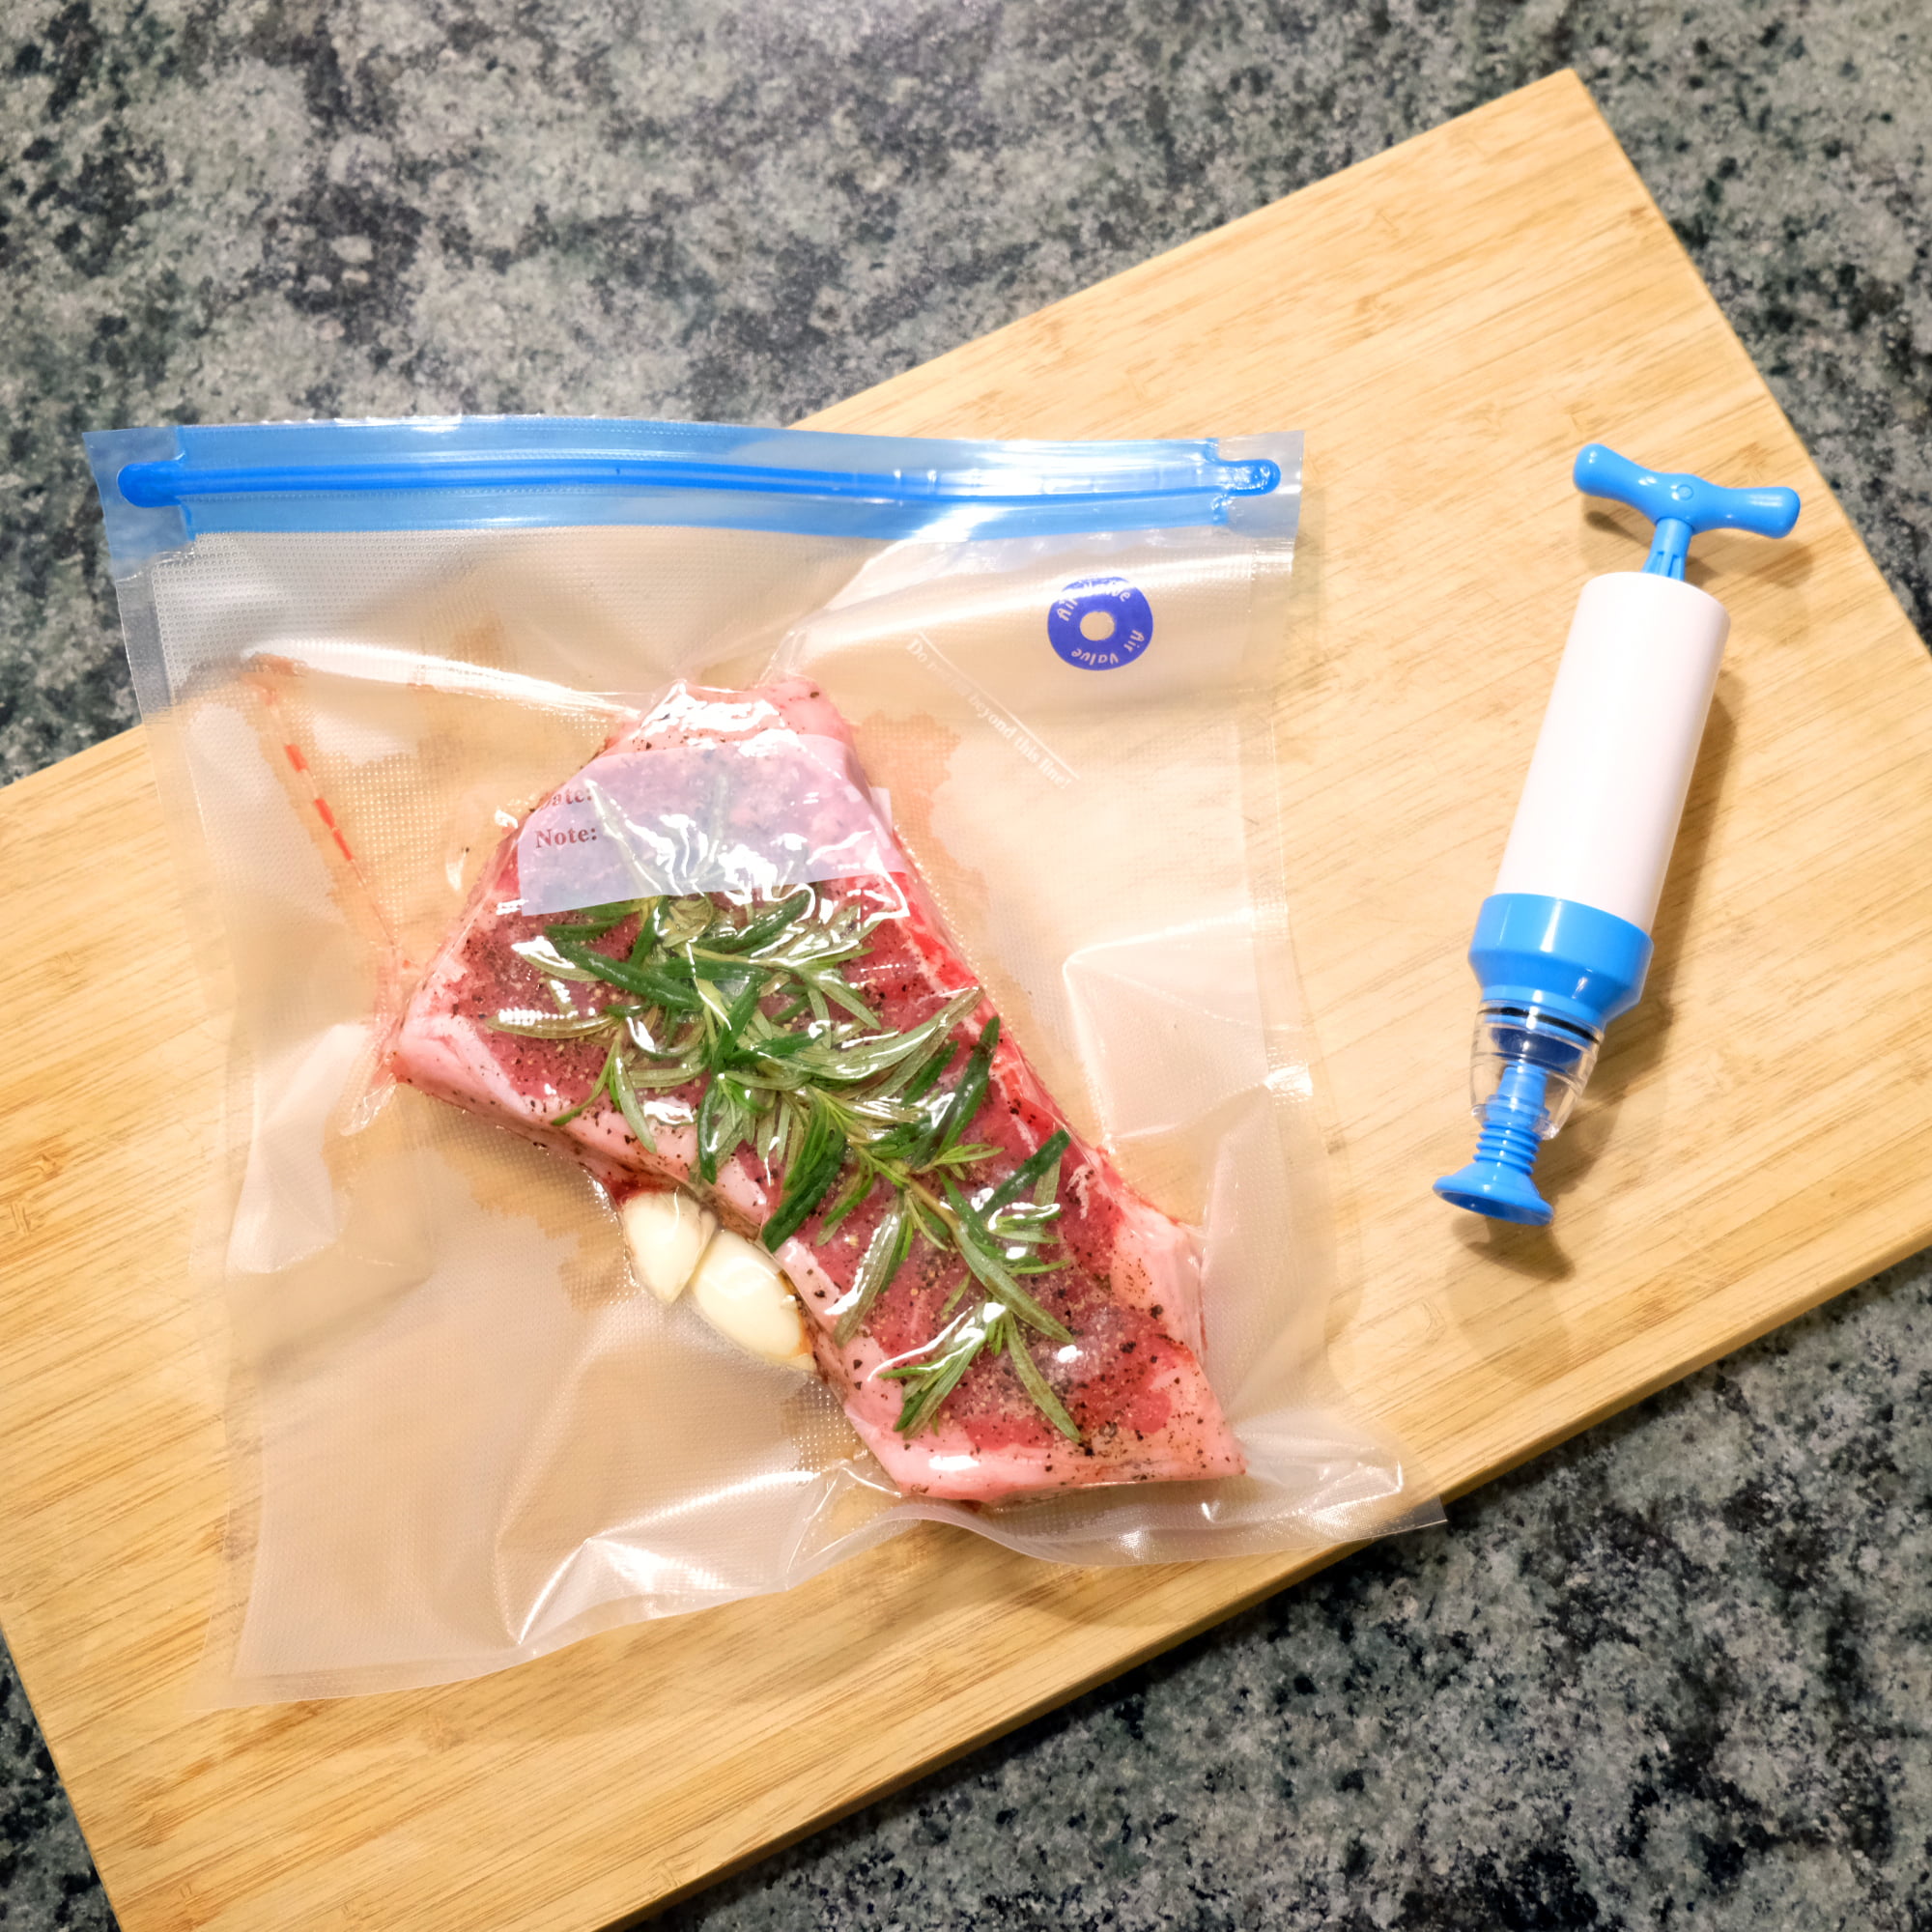  Sous-vide Bags, airtight and reusable freezer bags, BPA-free.  Medium size (9 x 11) and include 20 generic vacuum sealer bags compatible  with most sous vide pumps and machines. : Home 